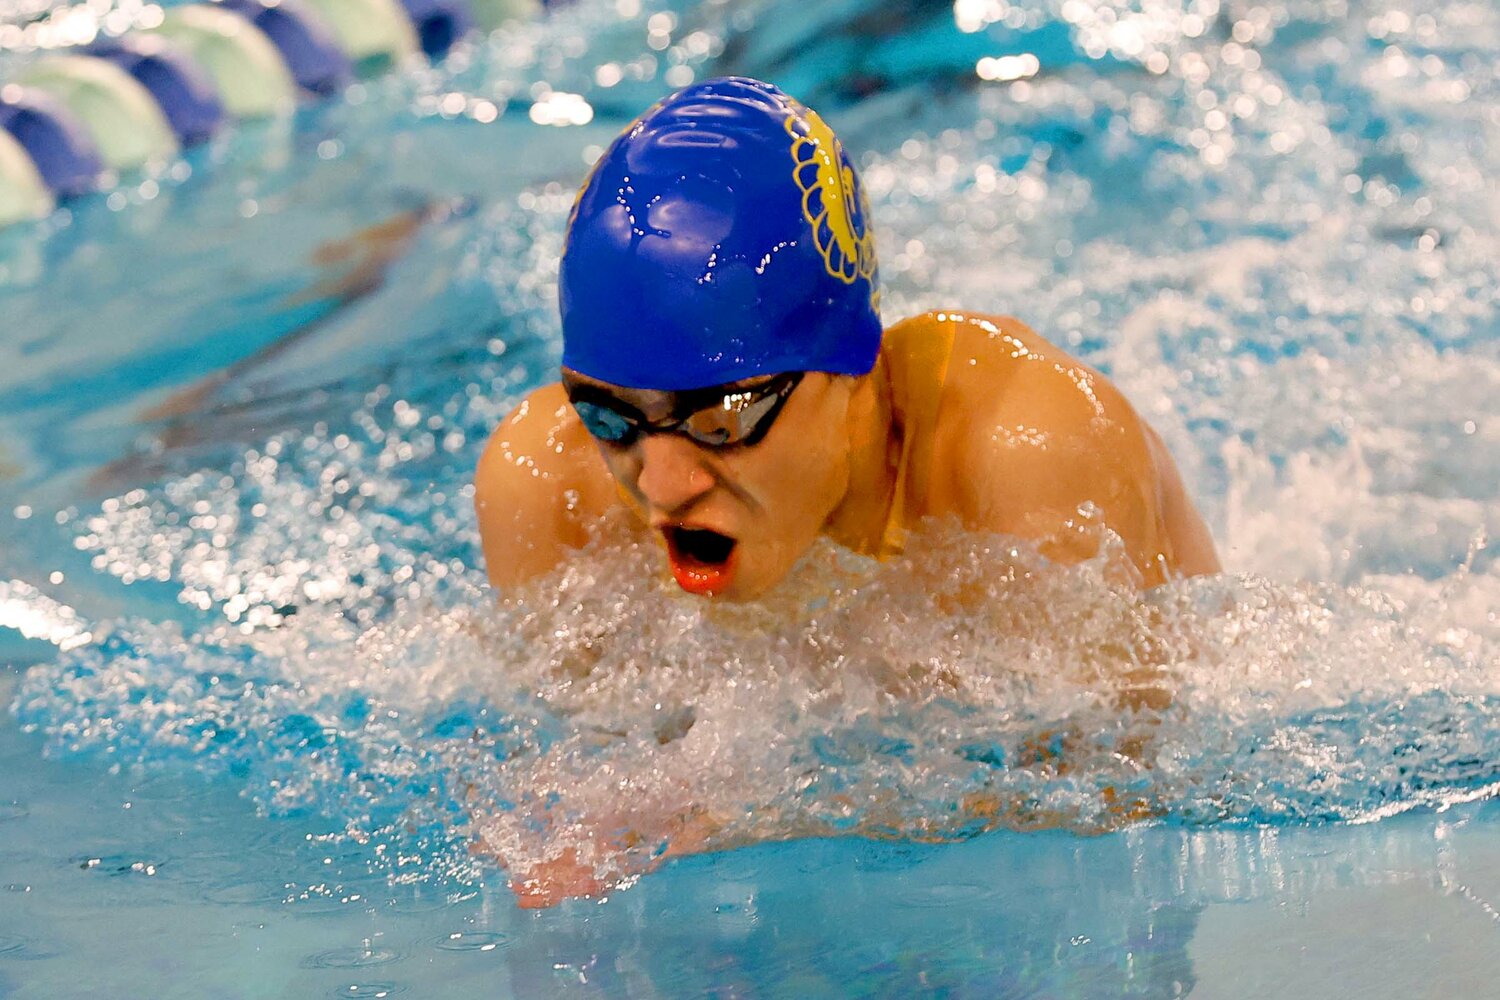 Senior Ryan Miller has stepped up in a big way for CHS this season and was the sectional champion in the breaststroke.